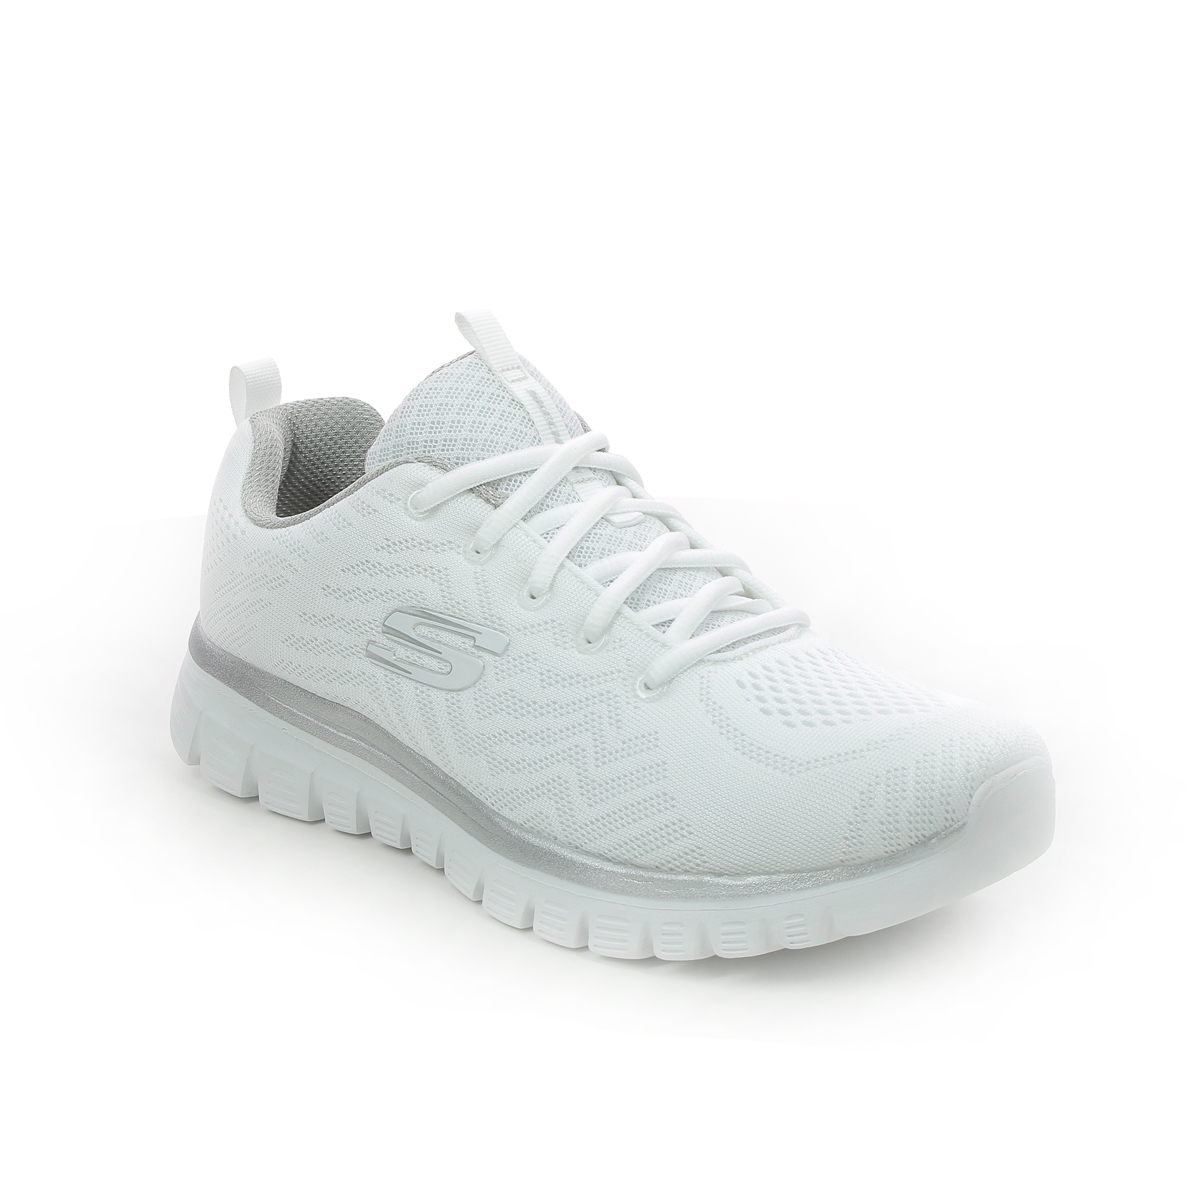 Skechers Get Connected White-Silver Womens Trainers 12615 In Size 4 In Plain White-Silver